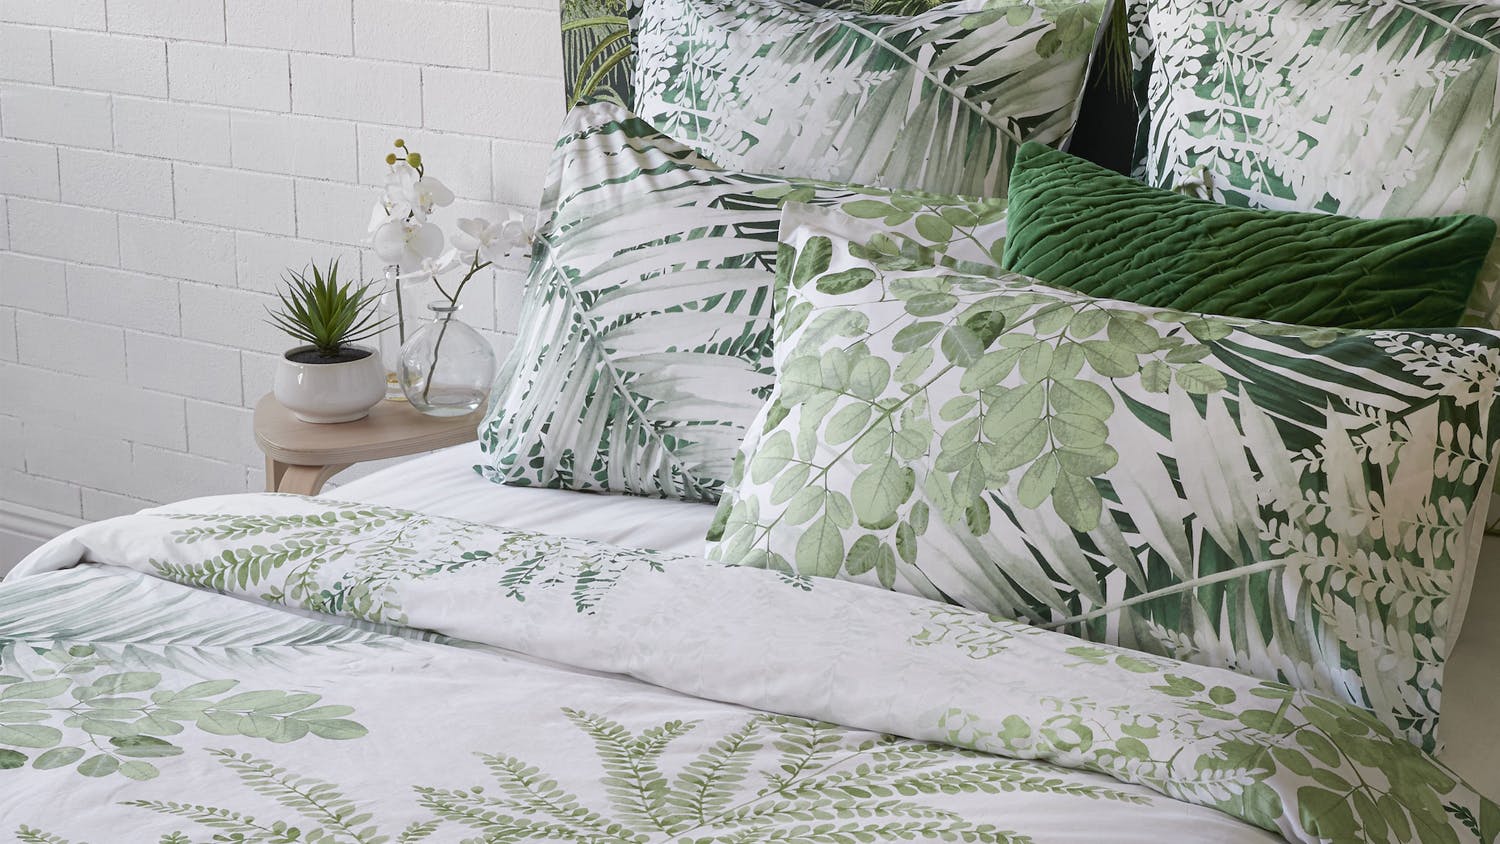 Breeze Duvet Cover Set by Luxotic - King